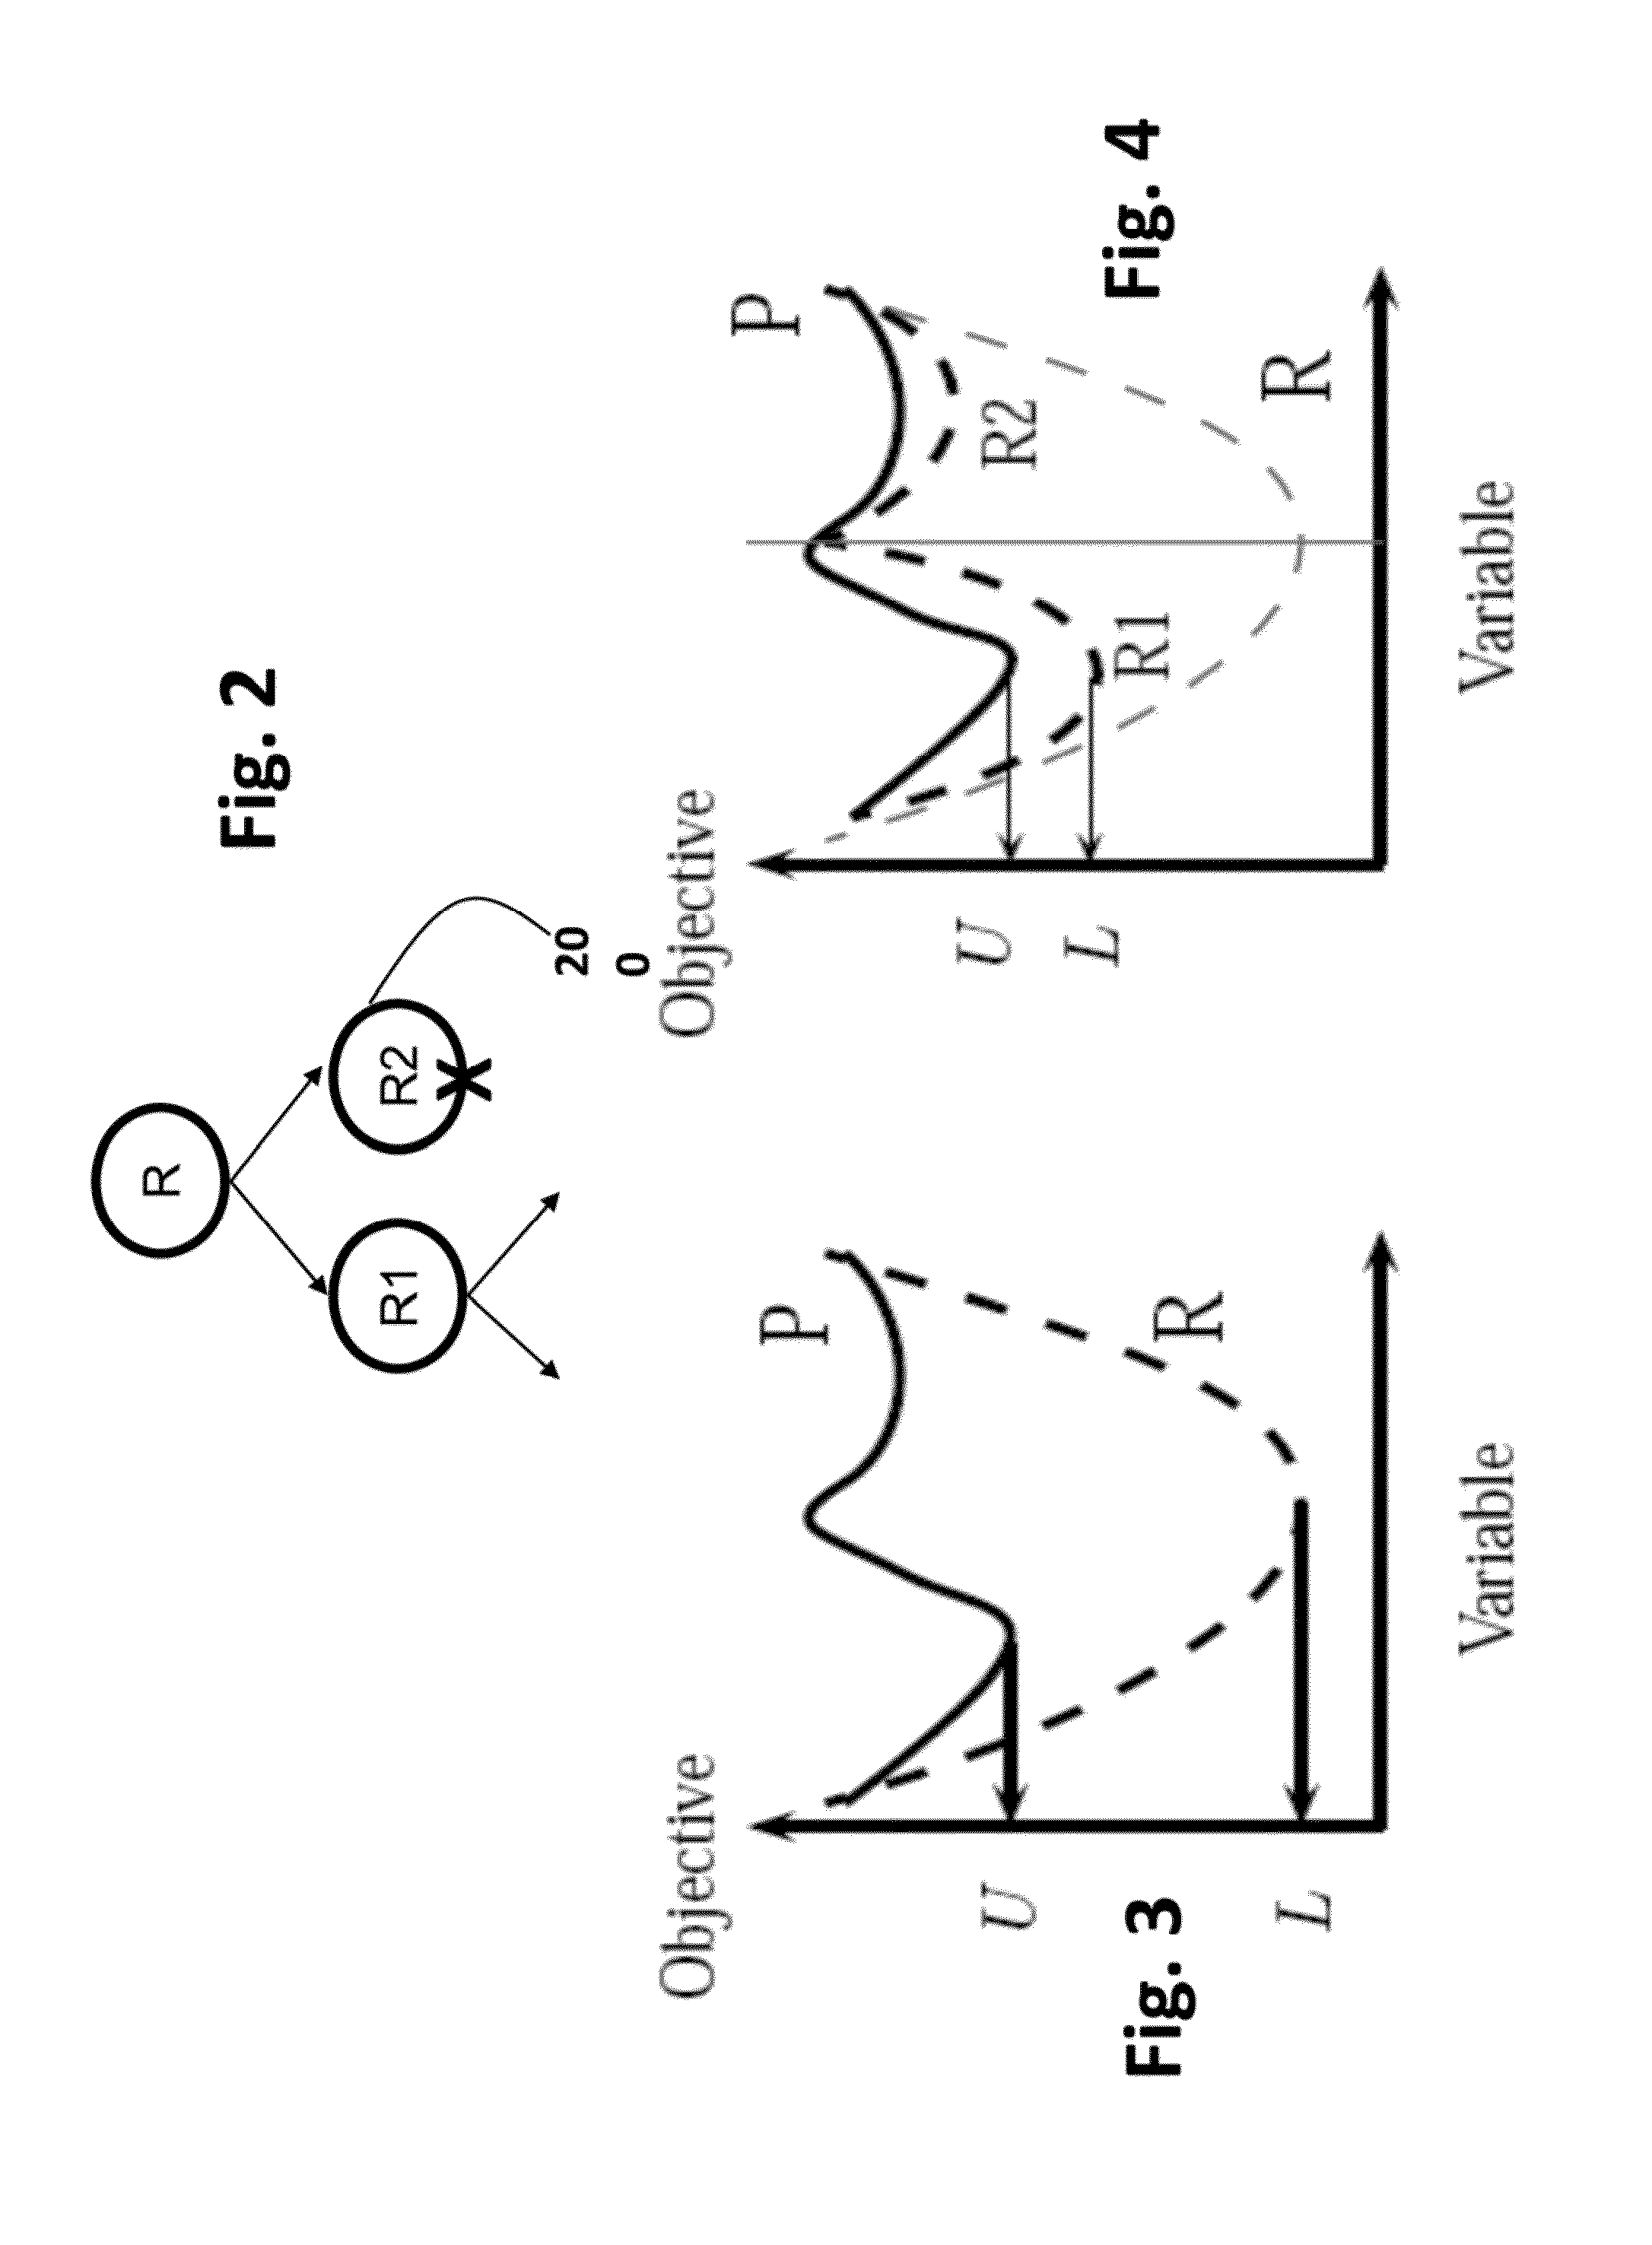 Method for Optimizing Power Flows in Electric Power Networks